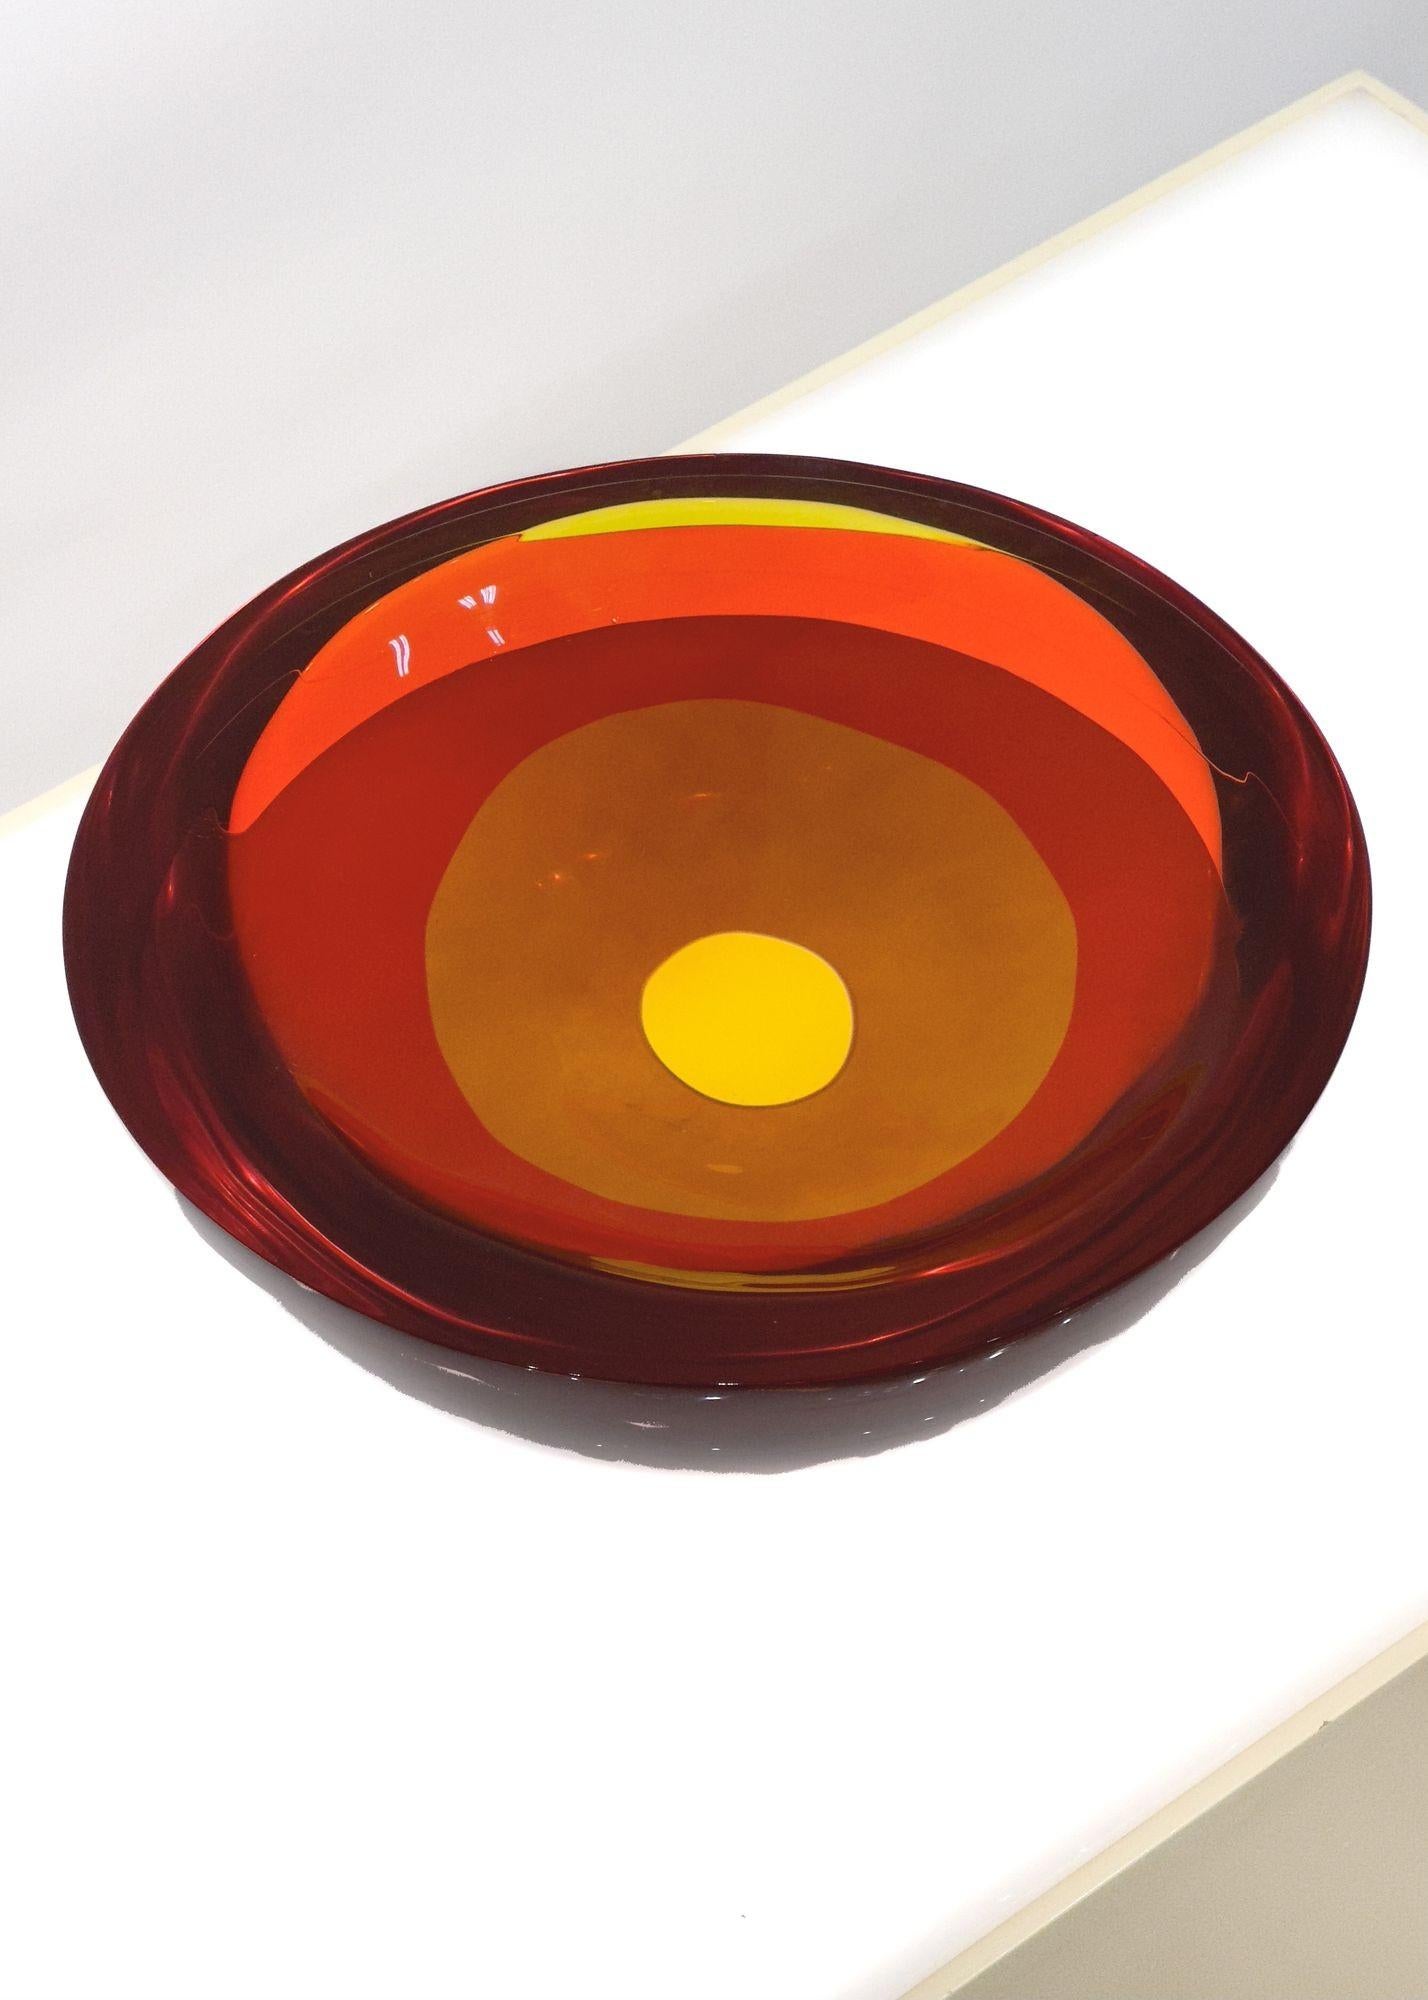 American Optical Acrylic Red Bowl by Maya & Terry Balle Signed Dated, 1994 For Sale